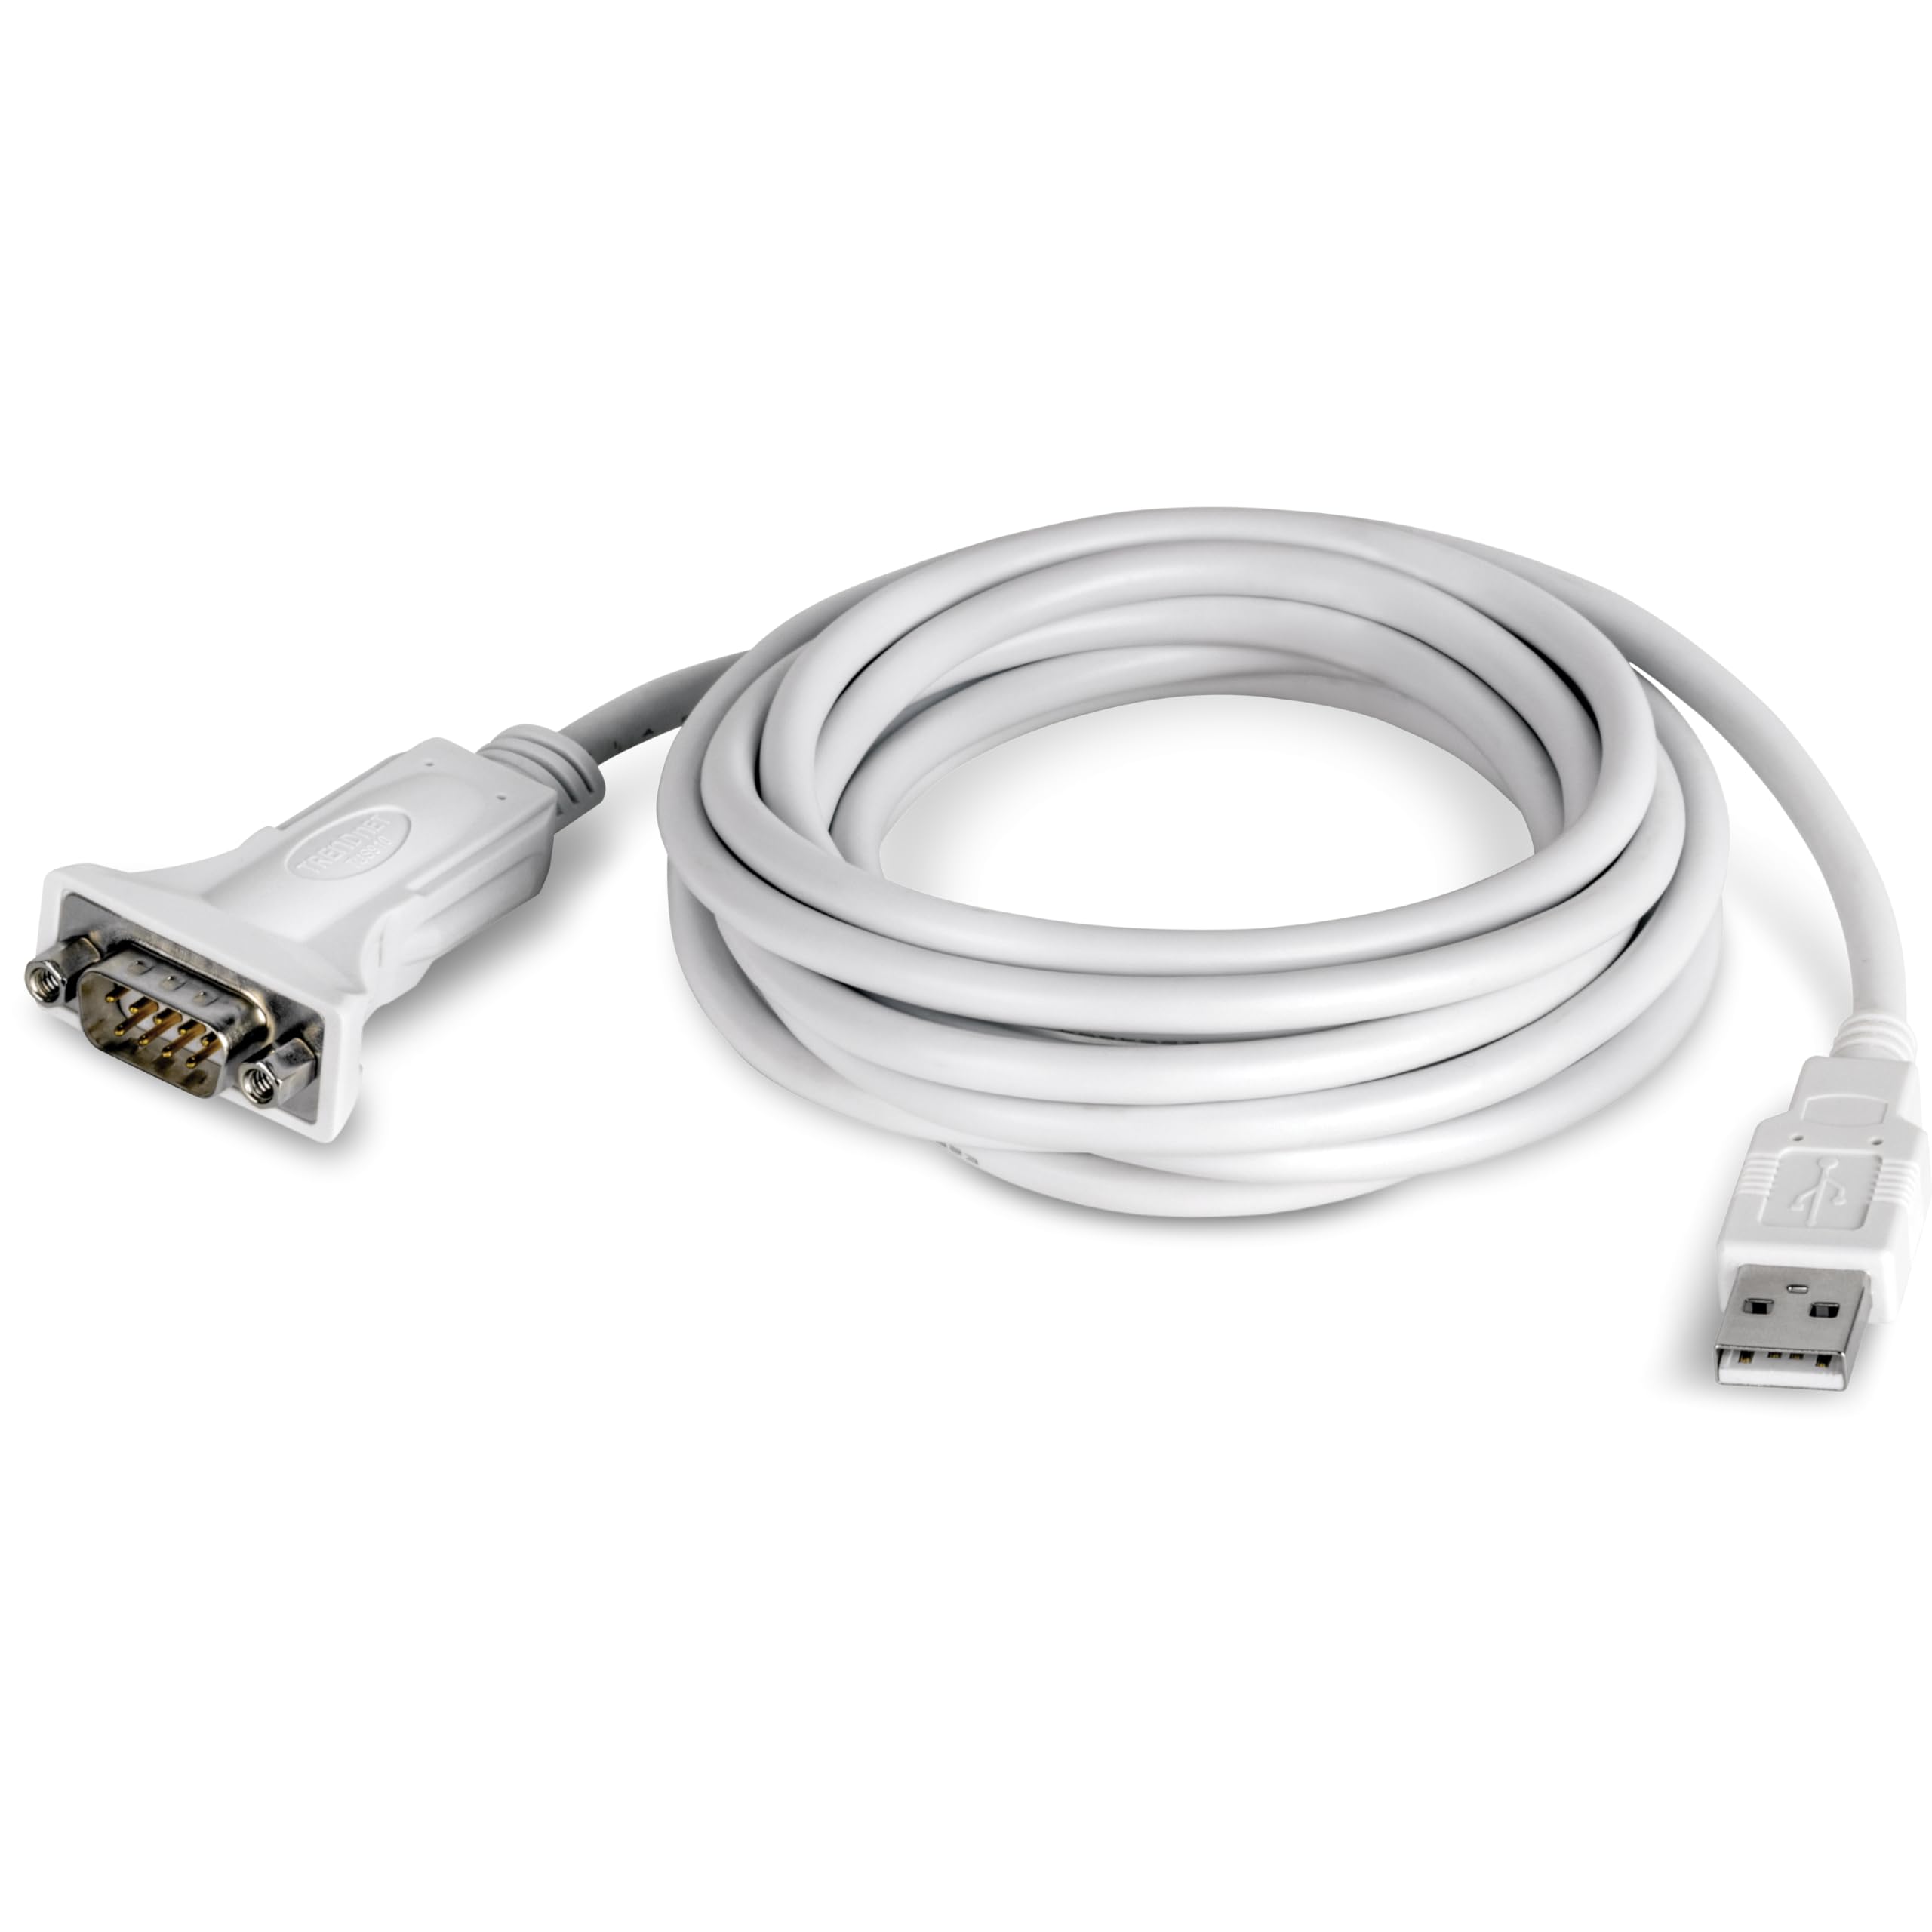 10 FT. USB TO SERIAL CONVERTER